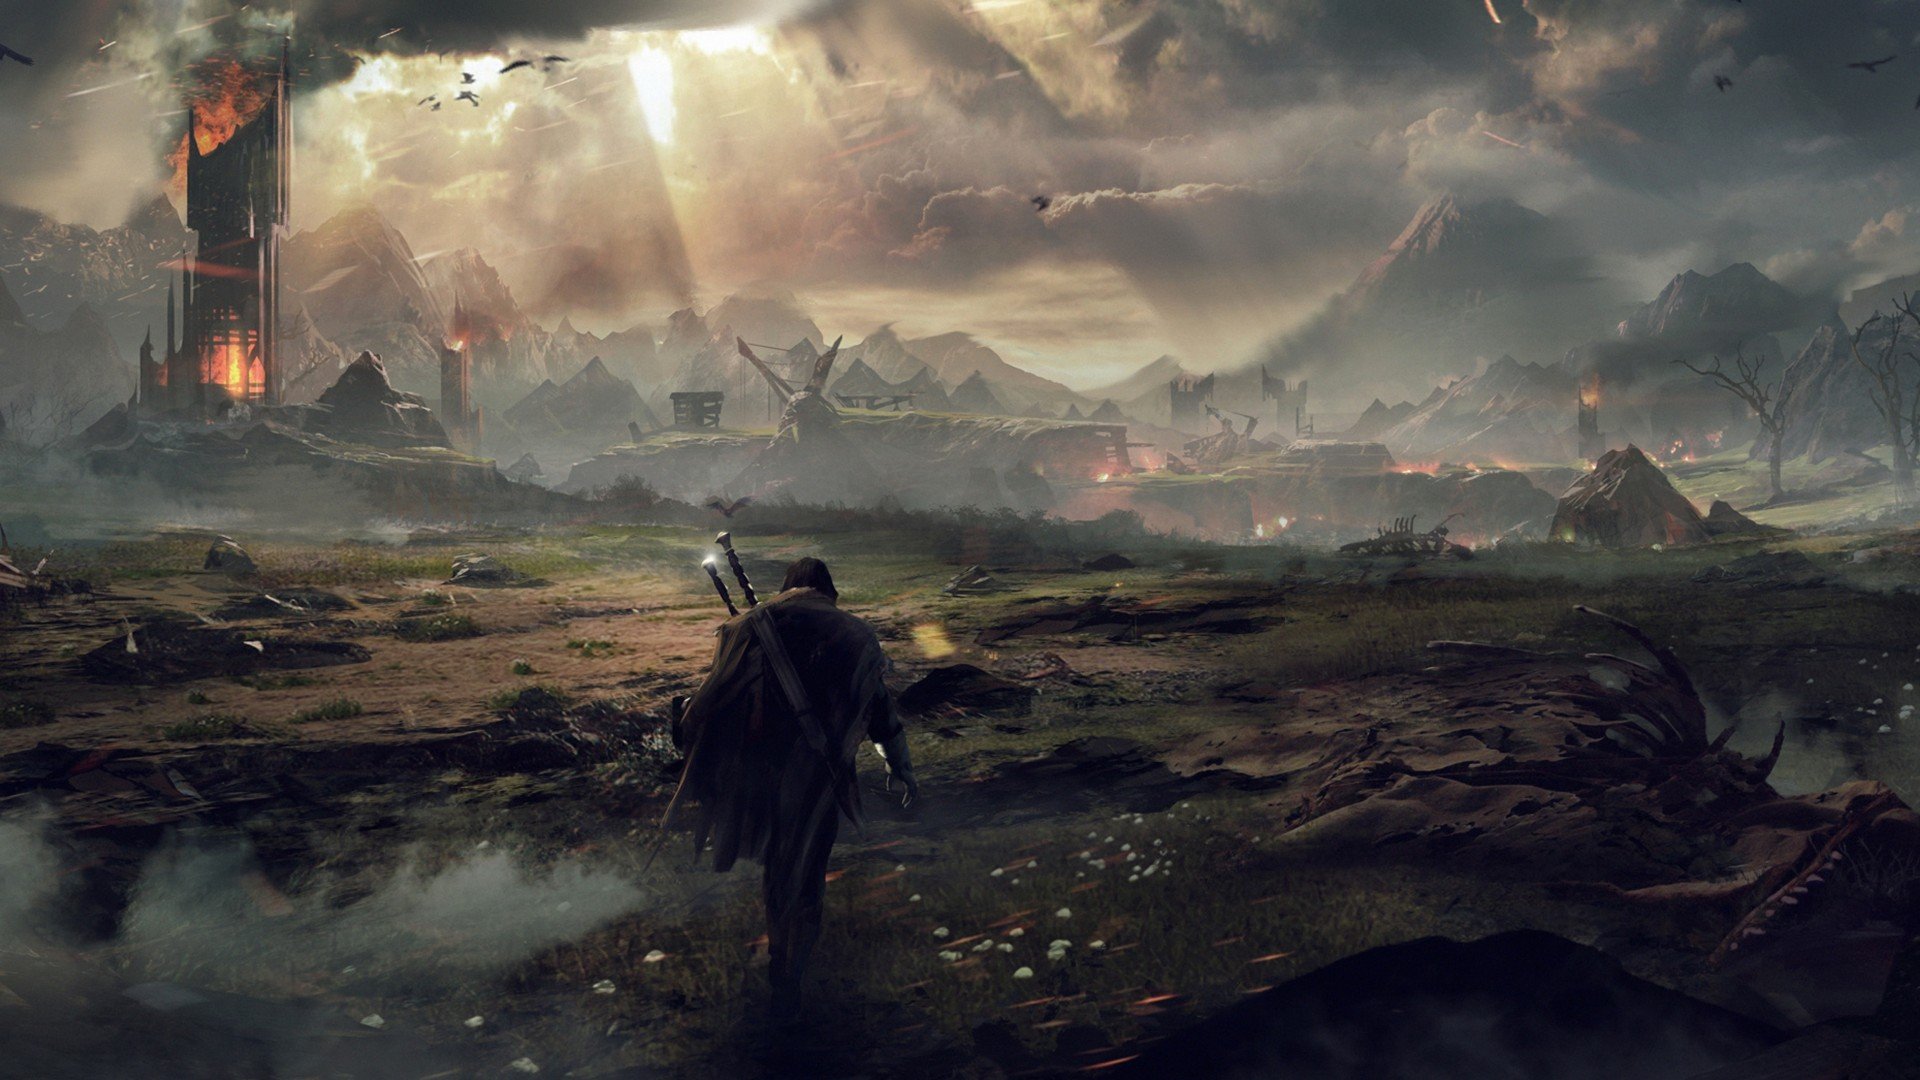 middle earth , Shadow, Of, Mordor, The, Lord, Of, The, Rings, Talion, Middle, Earth , The, Shadow, Of, Mordor, The, Lord, Of, The, Rings, Mordor, The, Taleon, Ranger, Ranger, The, Gondorian, Warrior, Ghost Wallpaper